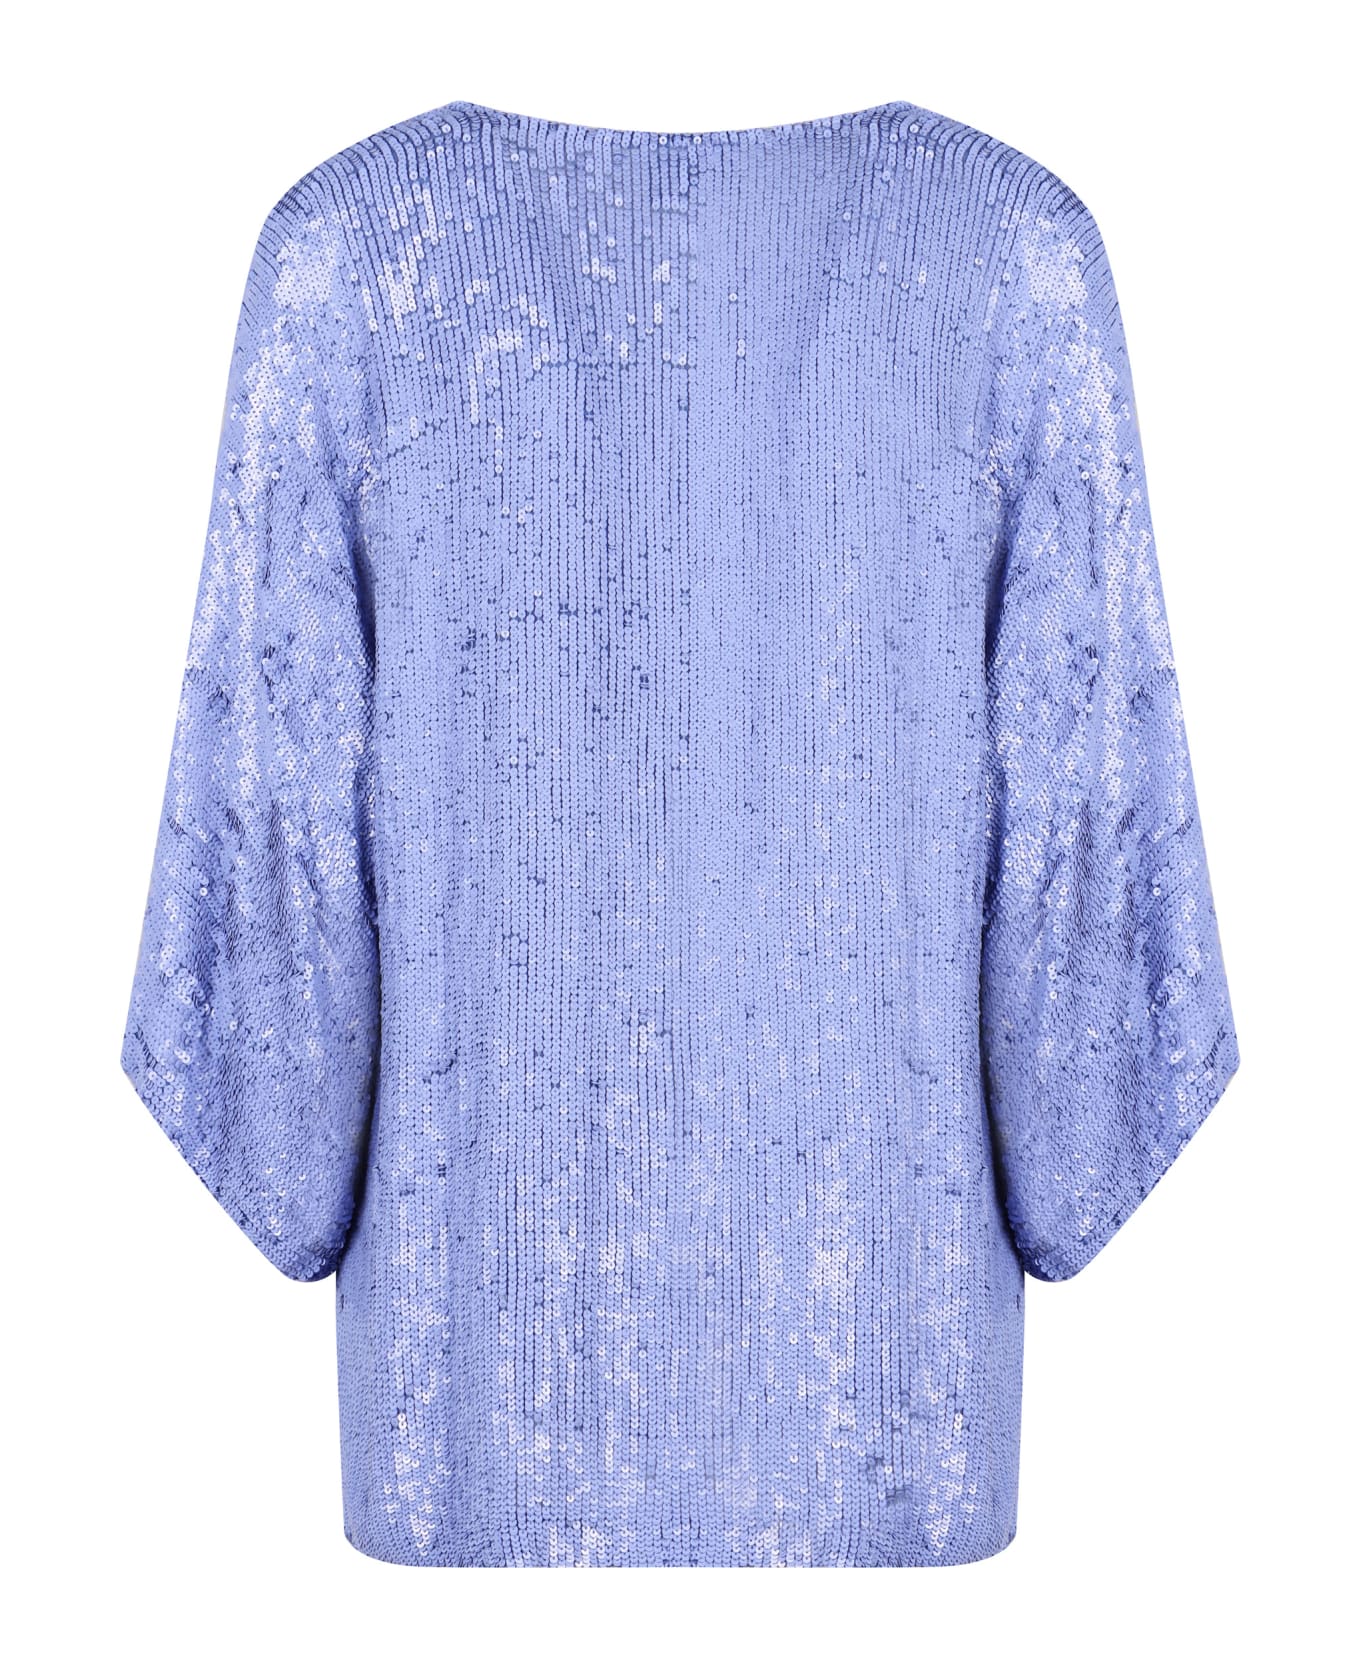 Parosh Sequined Blouse - Lilac ブラウス